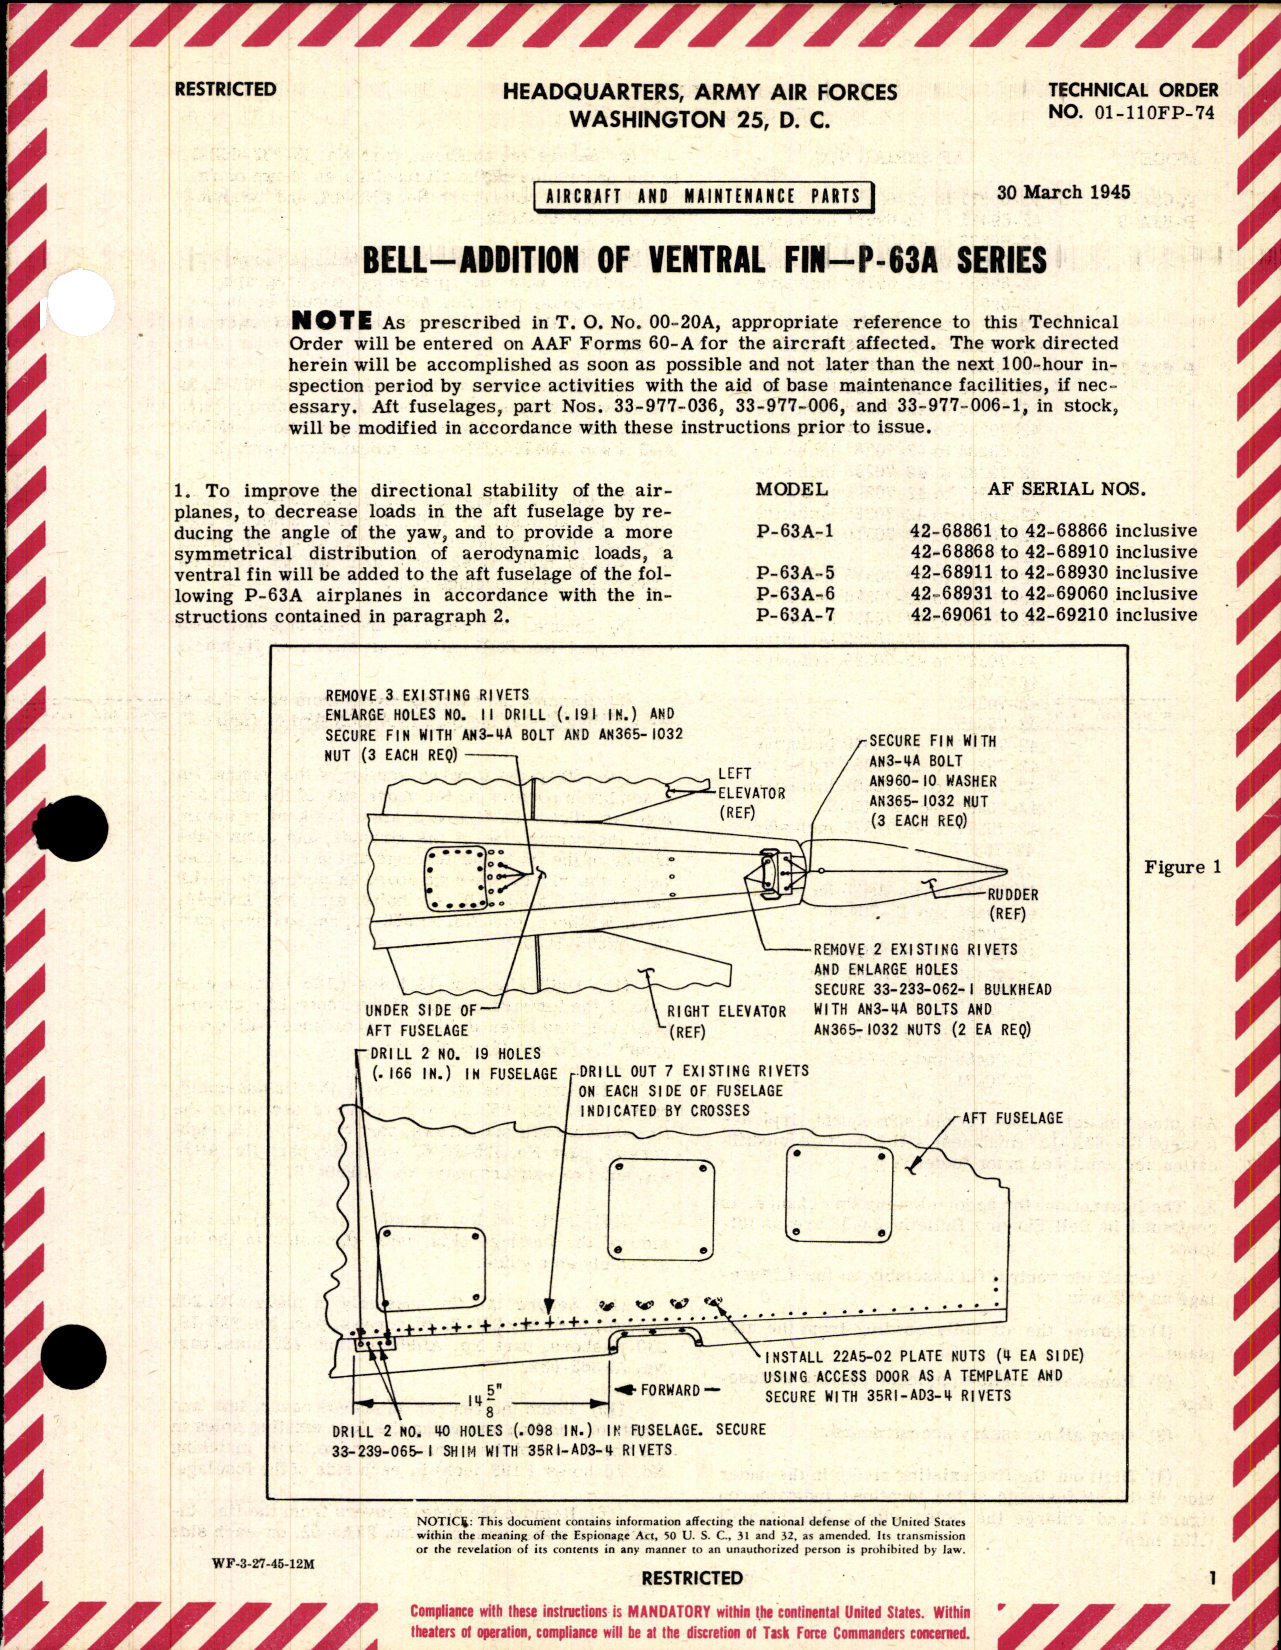 Sample page 1 from AirCorps Library document: Addition of Ventral Fin for P-63A Series